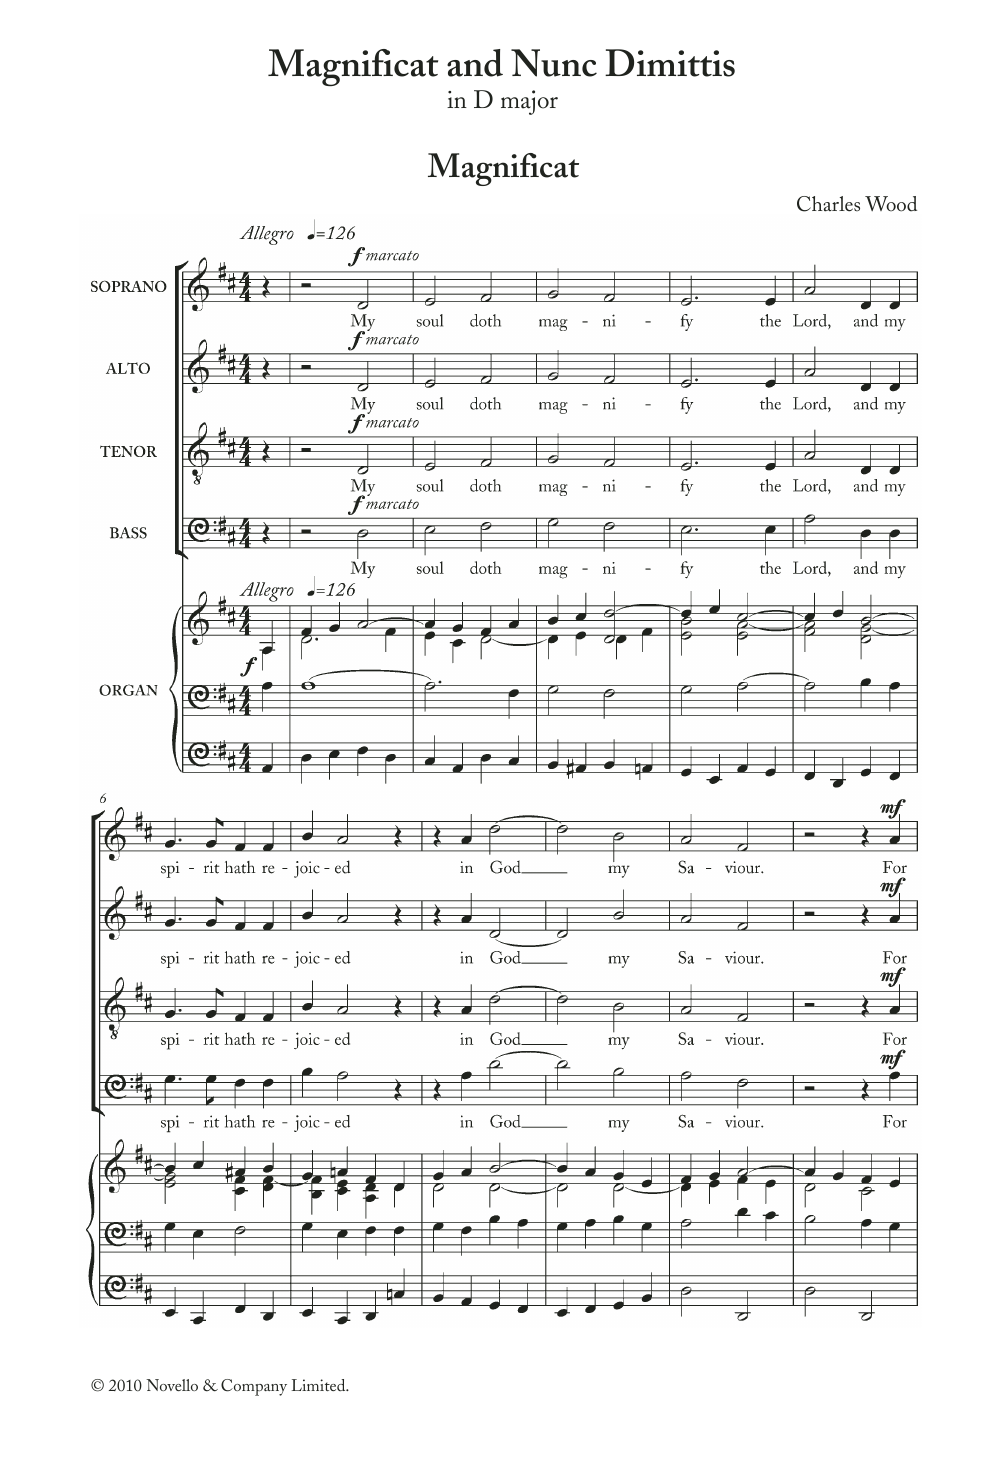 Download Charles Wood Magnificat And Nunc Dimittis In D Sheet Music